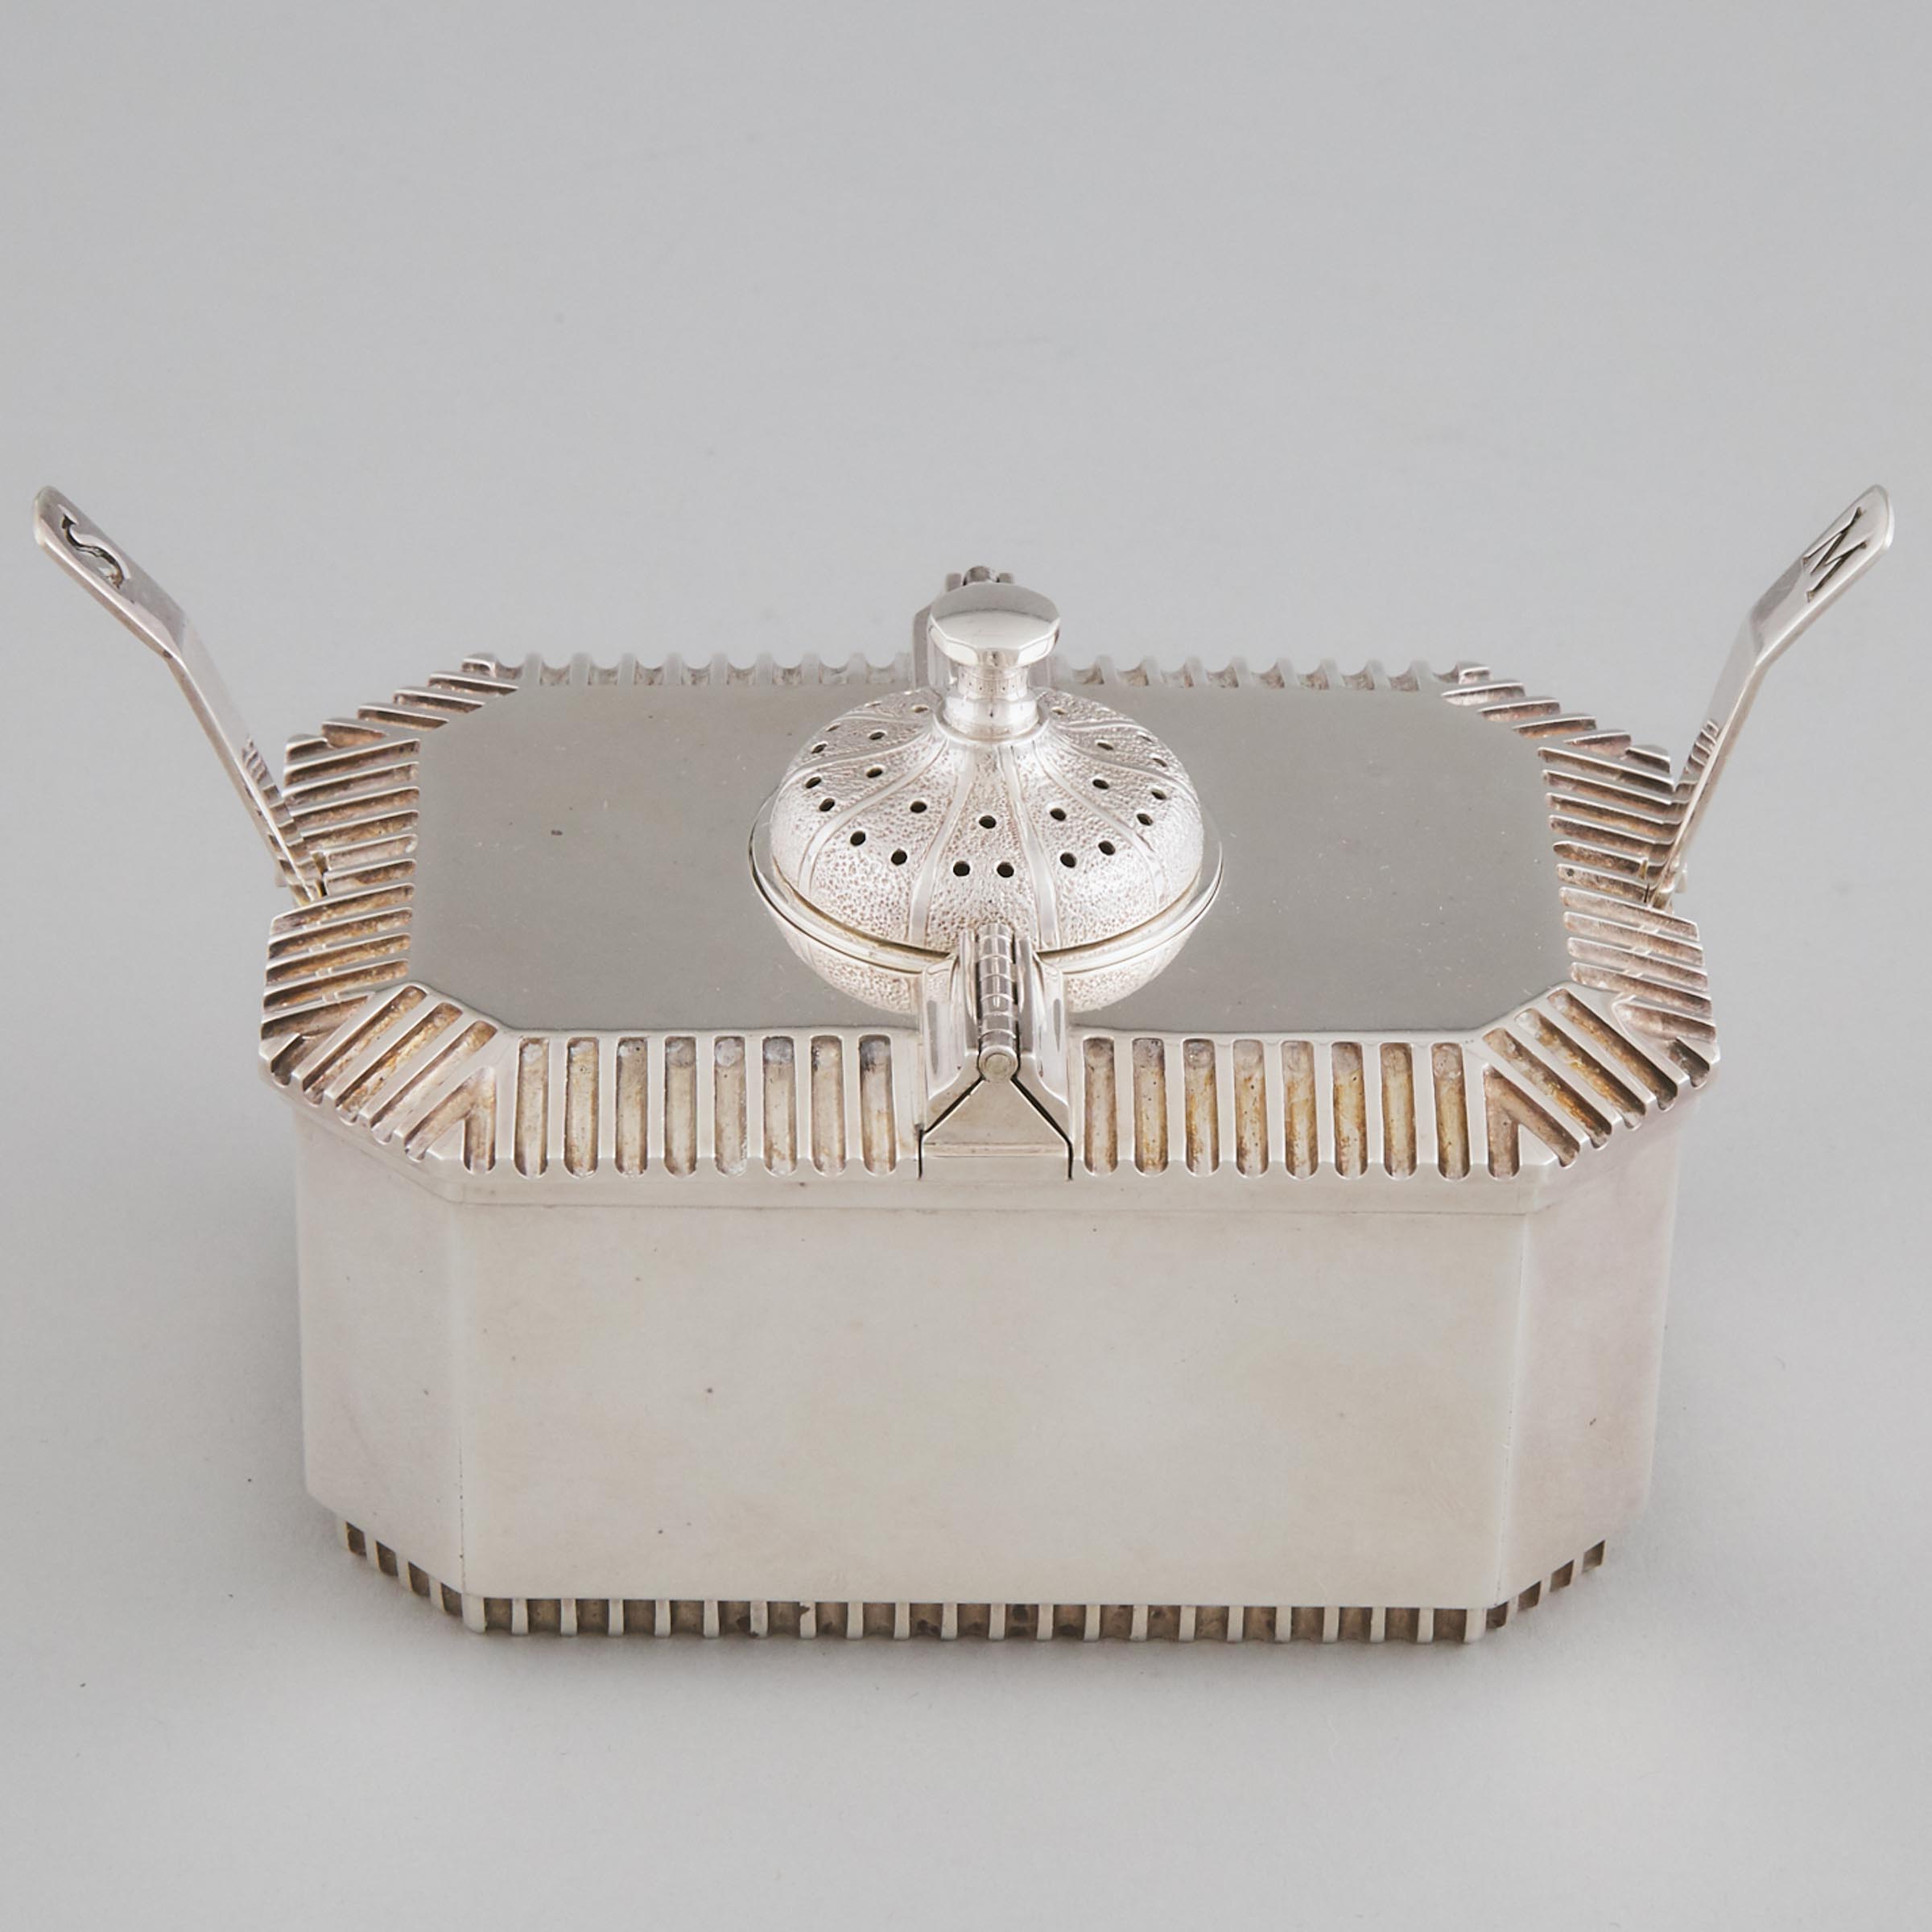 English Silver Condiment Cruet, Anthony Elson for Hennell, Frazer & Haws, London, 1970